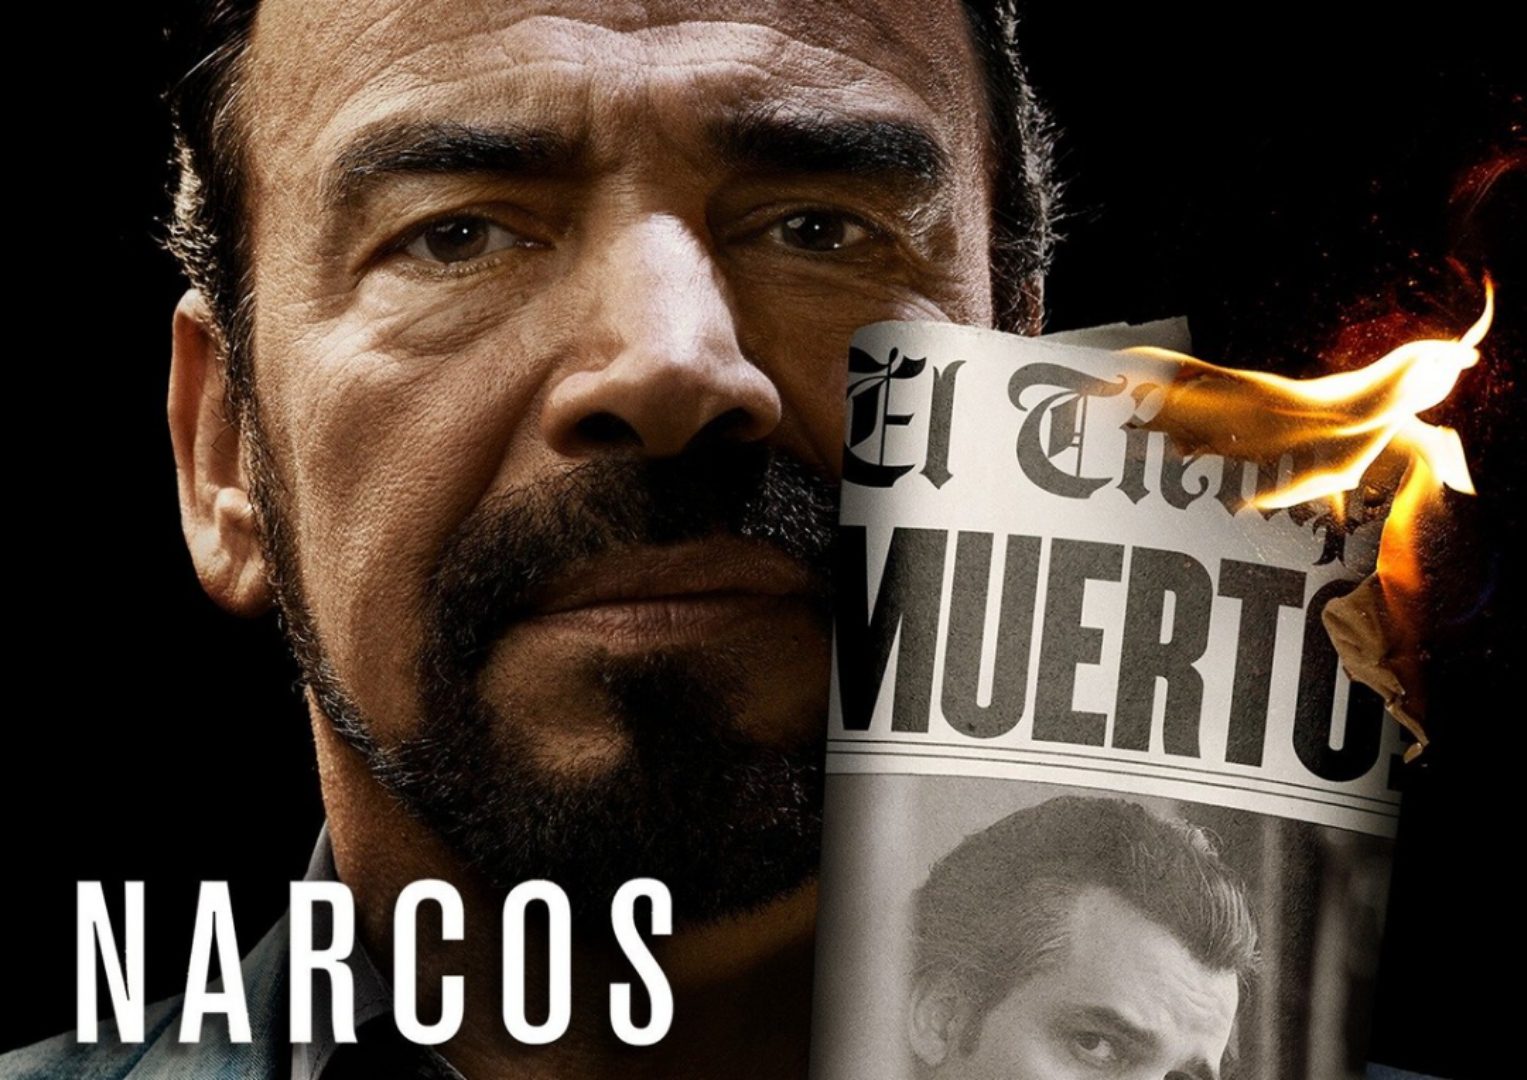 Narcos is based on the life of Pablo Escobar 